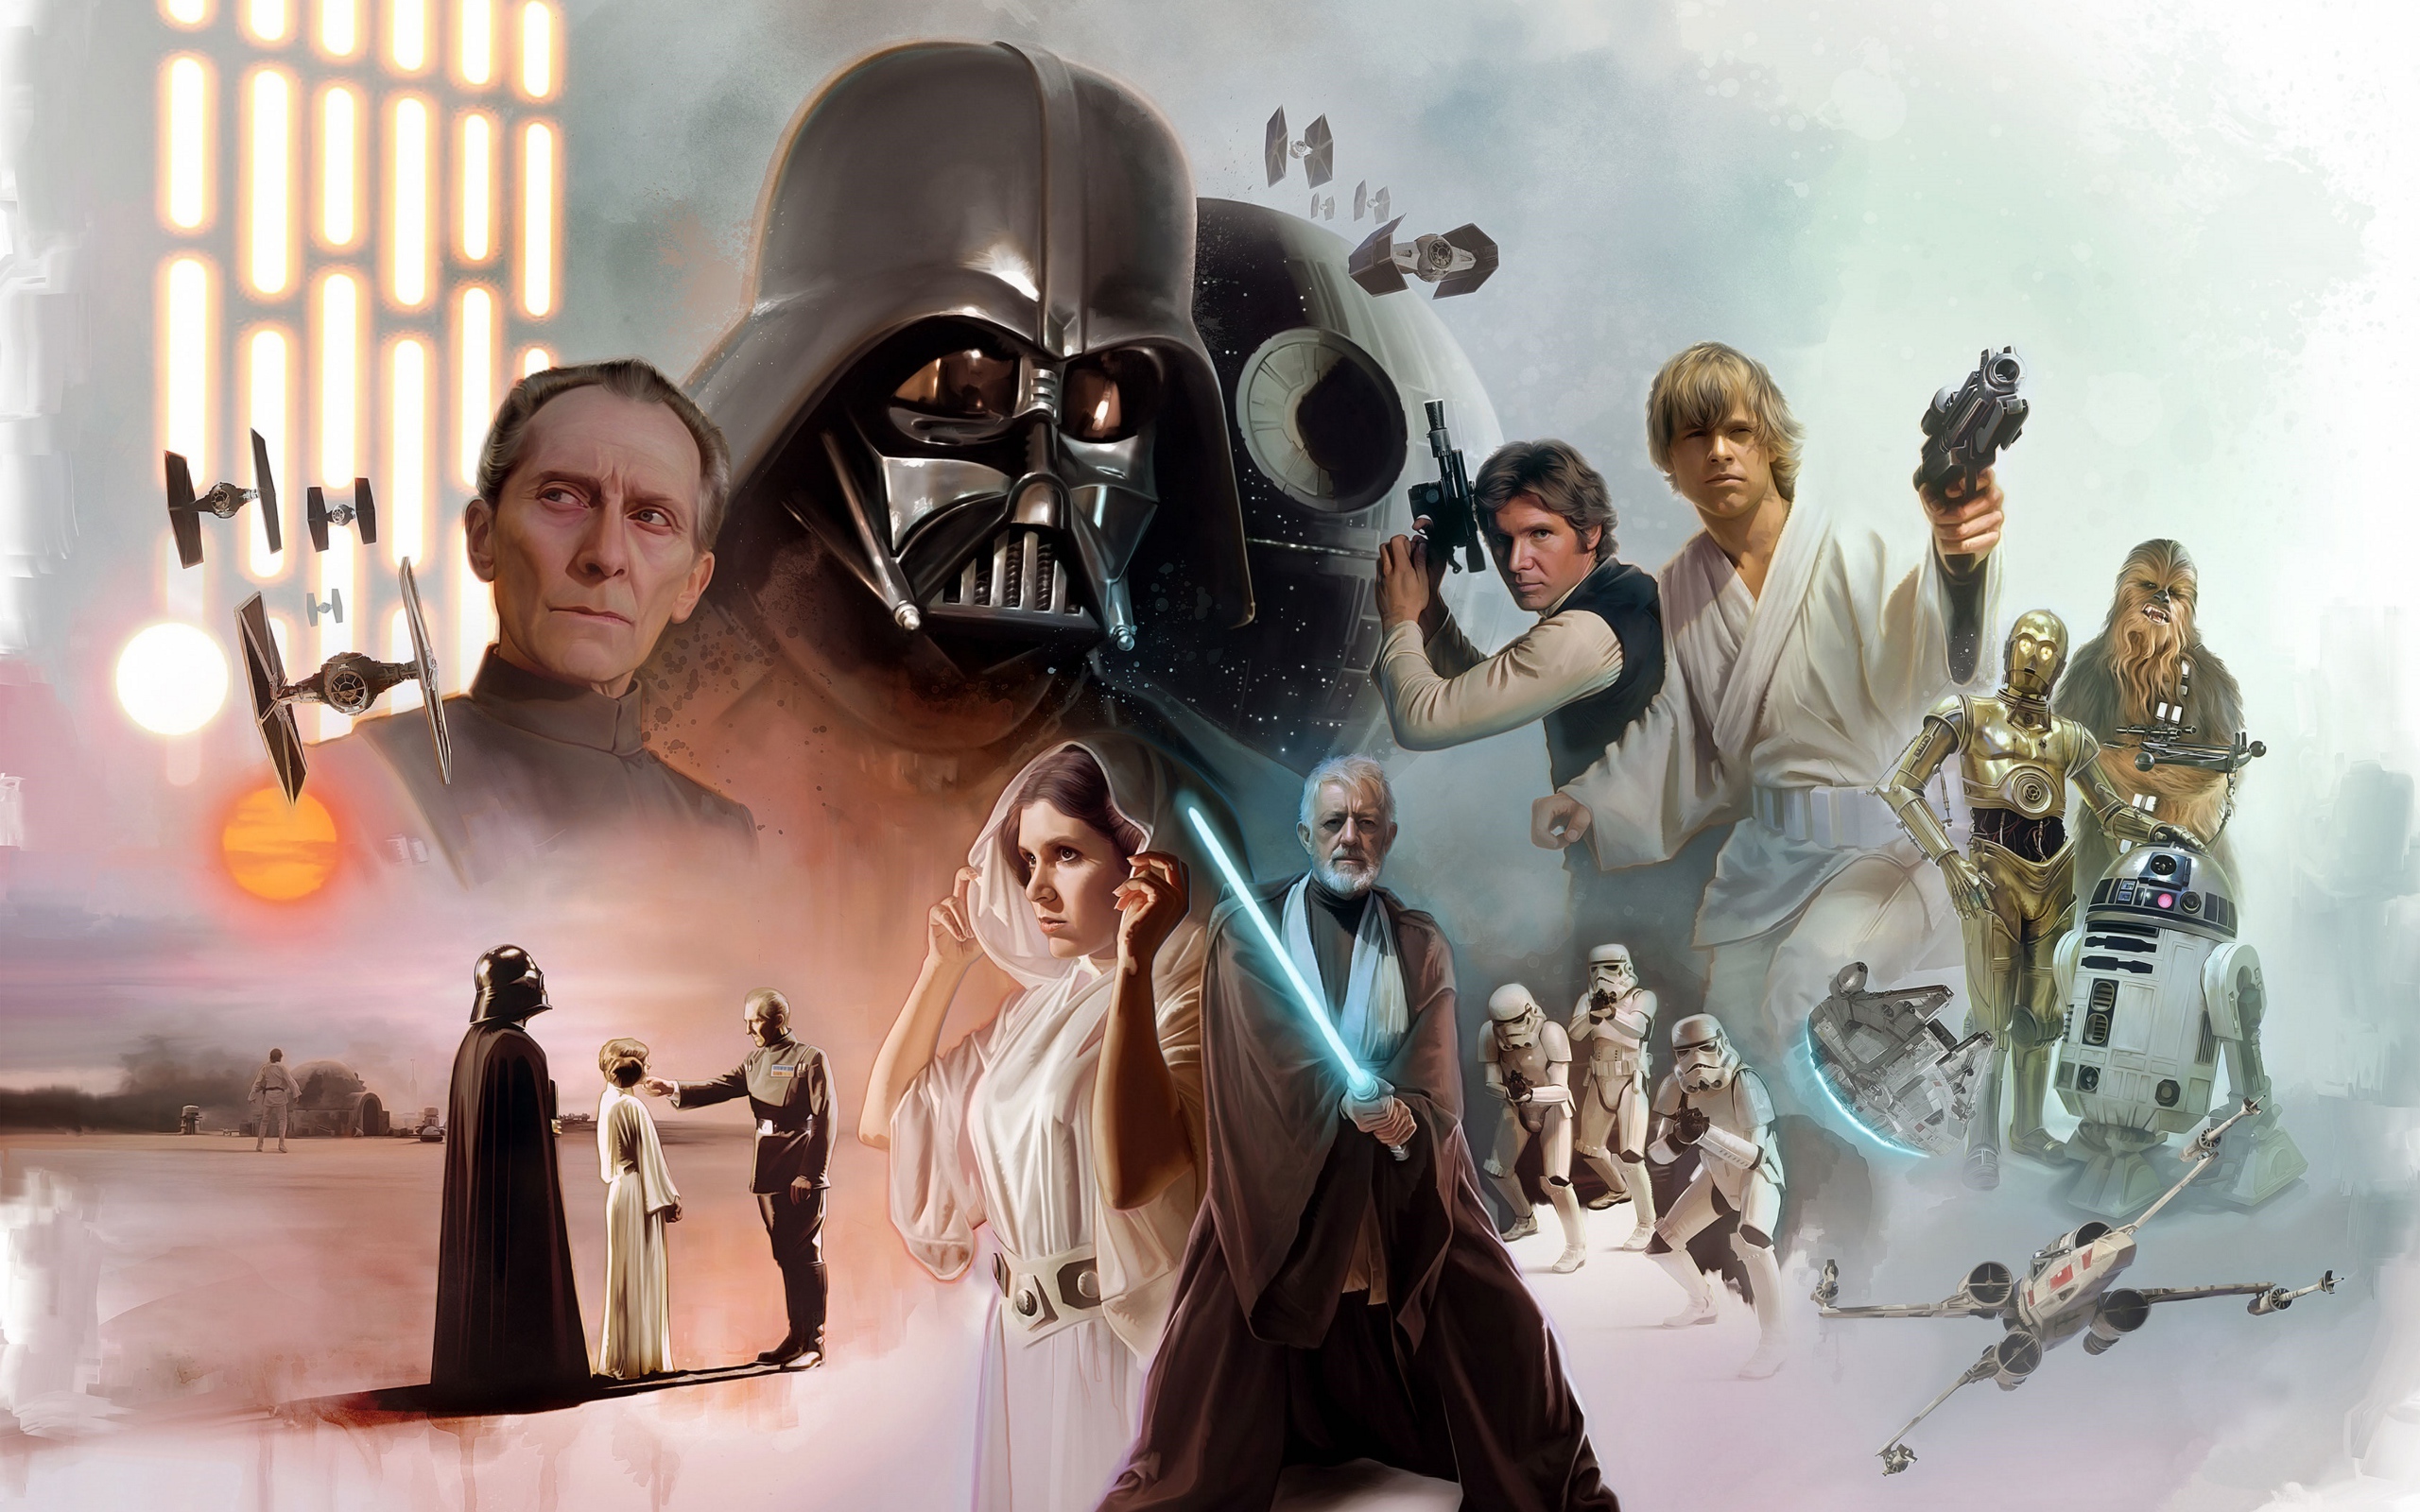 Characters in the popular Star Wars movie